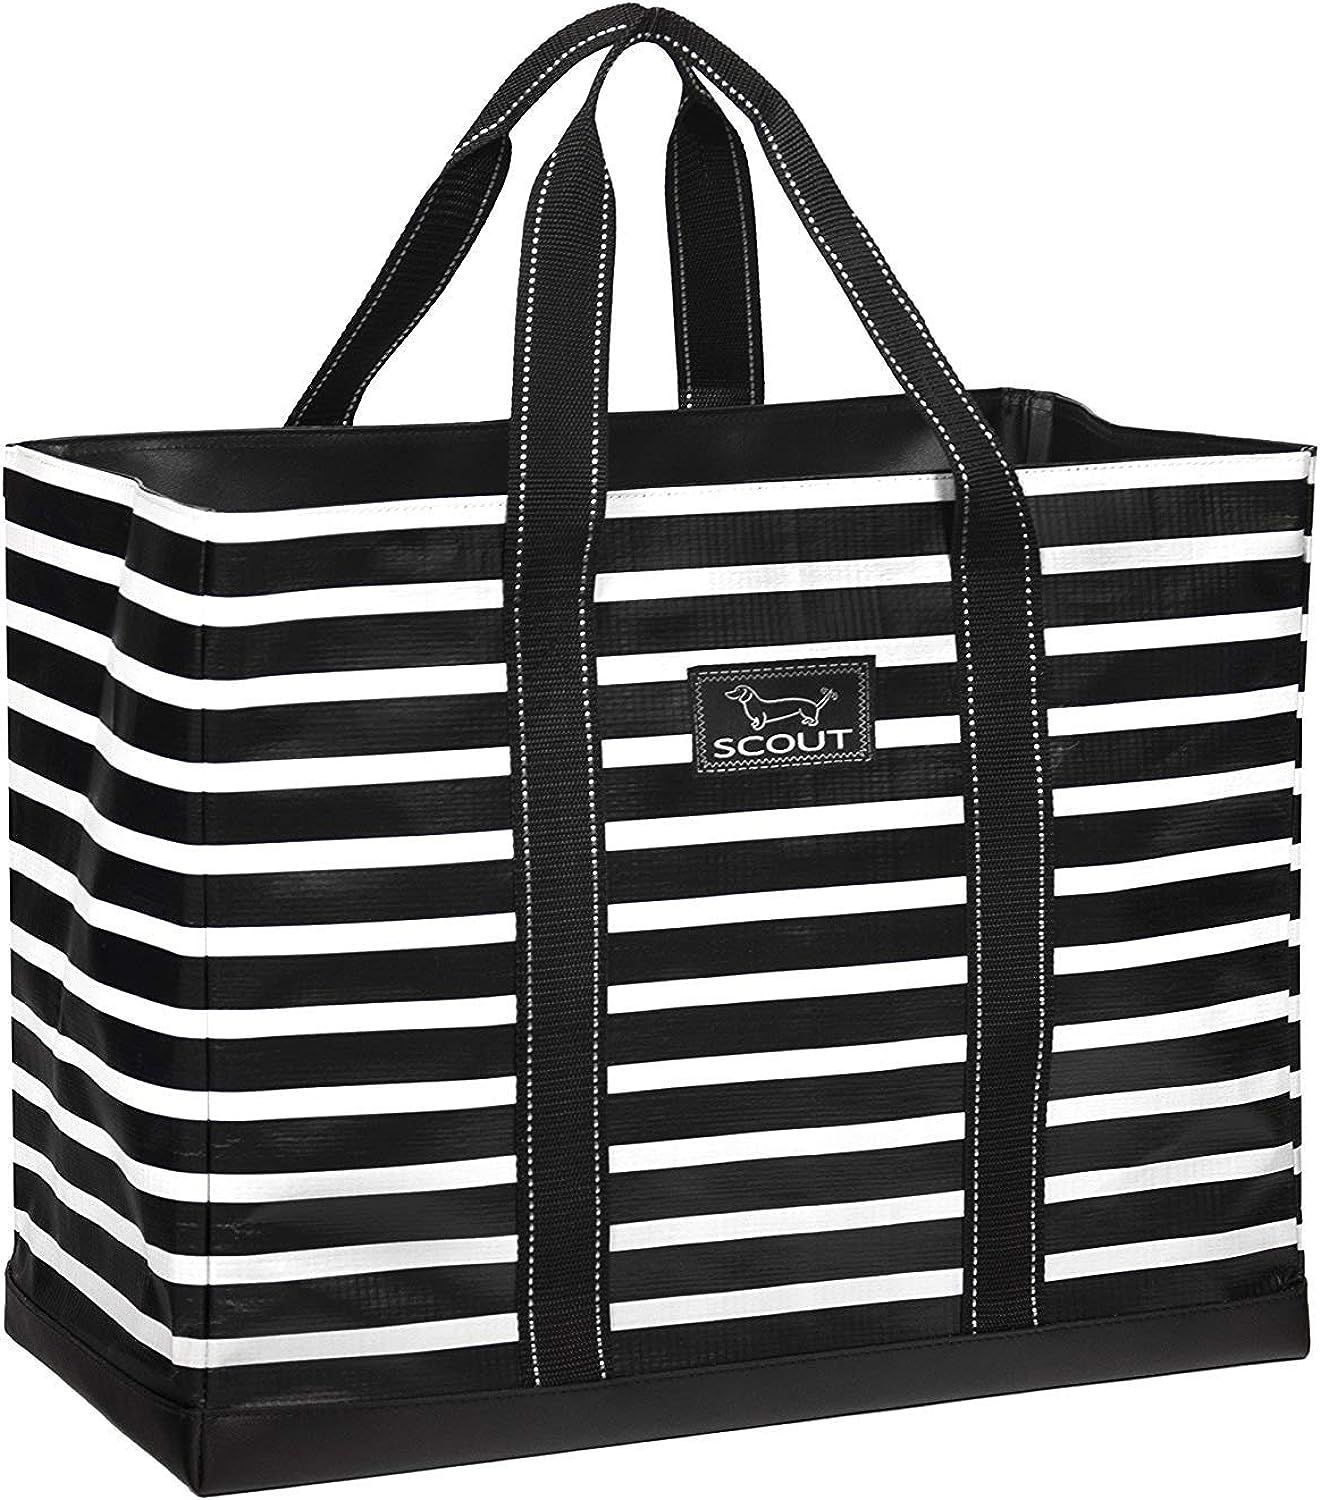 SCOUT Original Deano Extra Large Lightweight Tote Bag | Amazon (US)